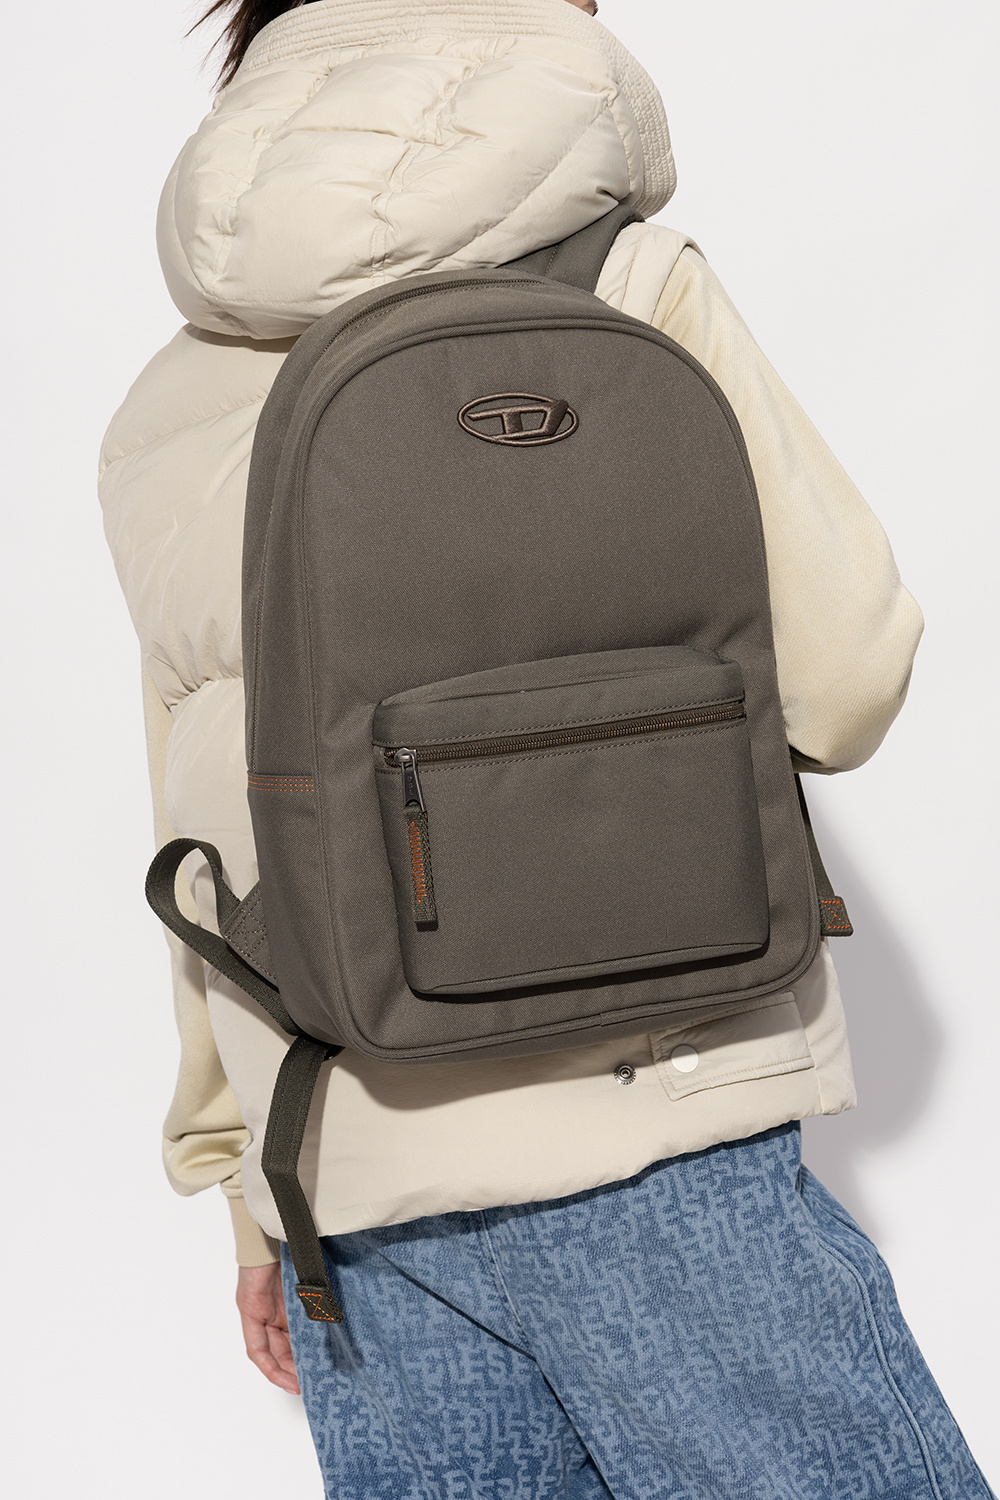 Diesel ‘D. 90’ backpack with logo